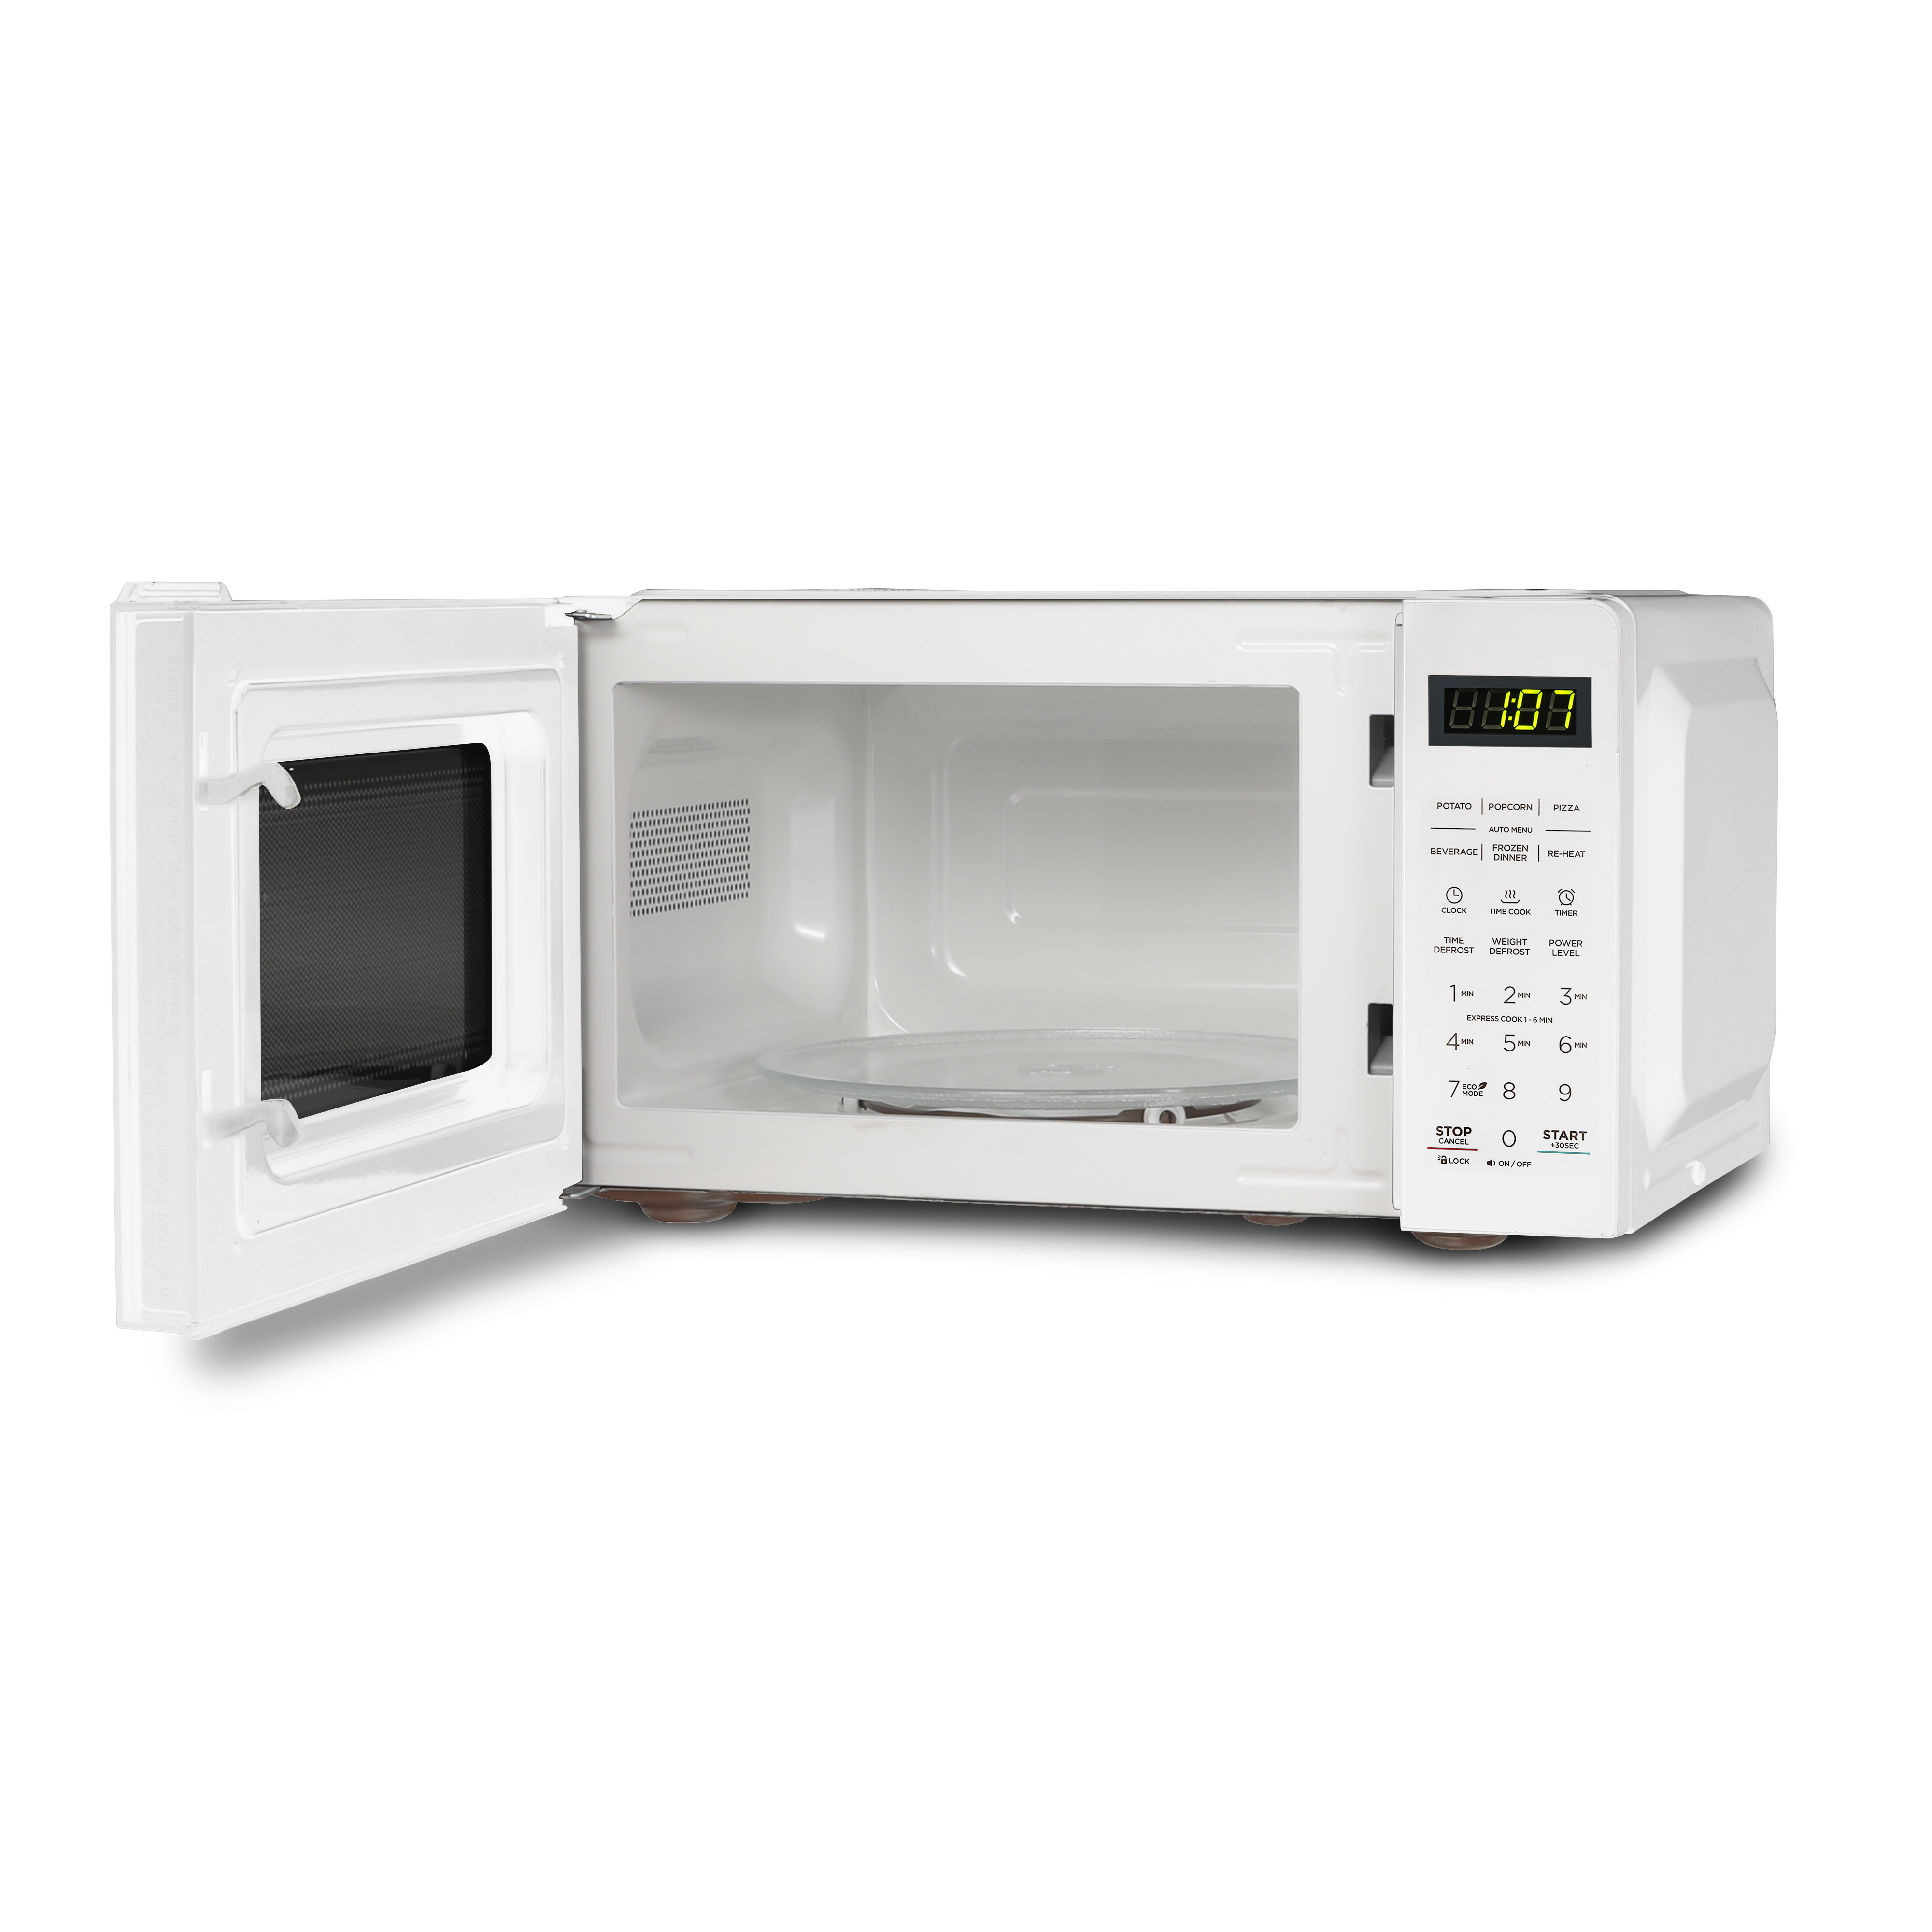 COMMERCIAL CHEF 0.7 Cu Ft Microwave with 10 Power Levels, 700W Microwave  with Digital Display, Countertop Microwave with Child Safety Door Lock